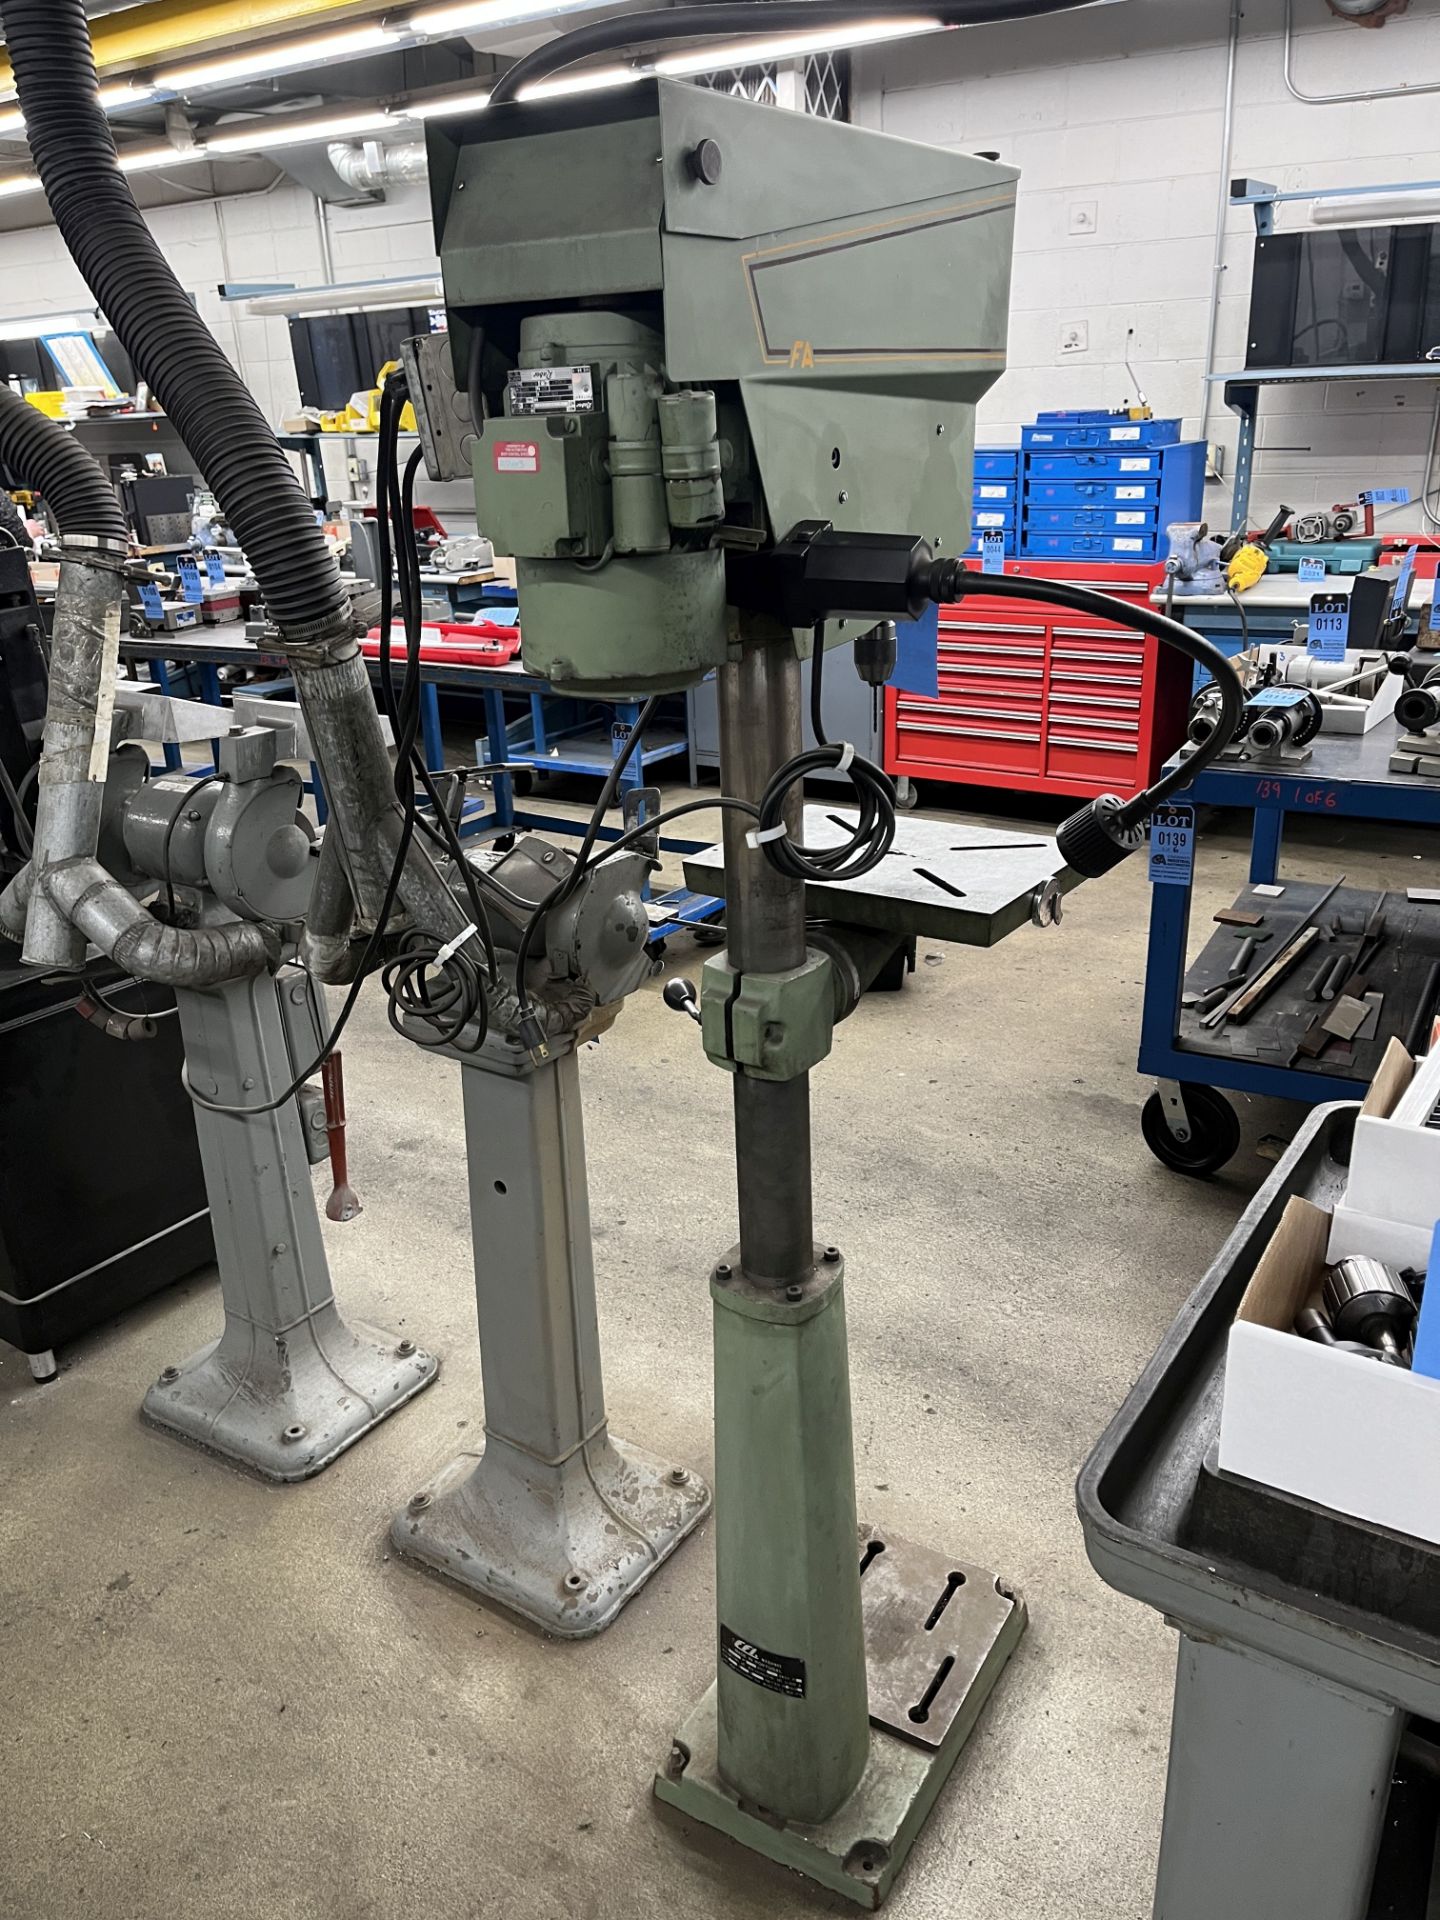 16" DOALL MODEL DV-16 FLOOR TYPE VARIABLE SPEED DRILL PRESS; S/N 8604, 10" X 14" TABLE, 4" QUILL - Image 5 of 10